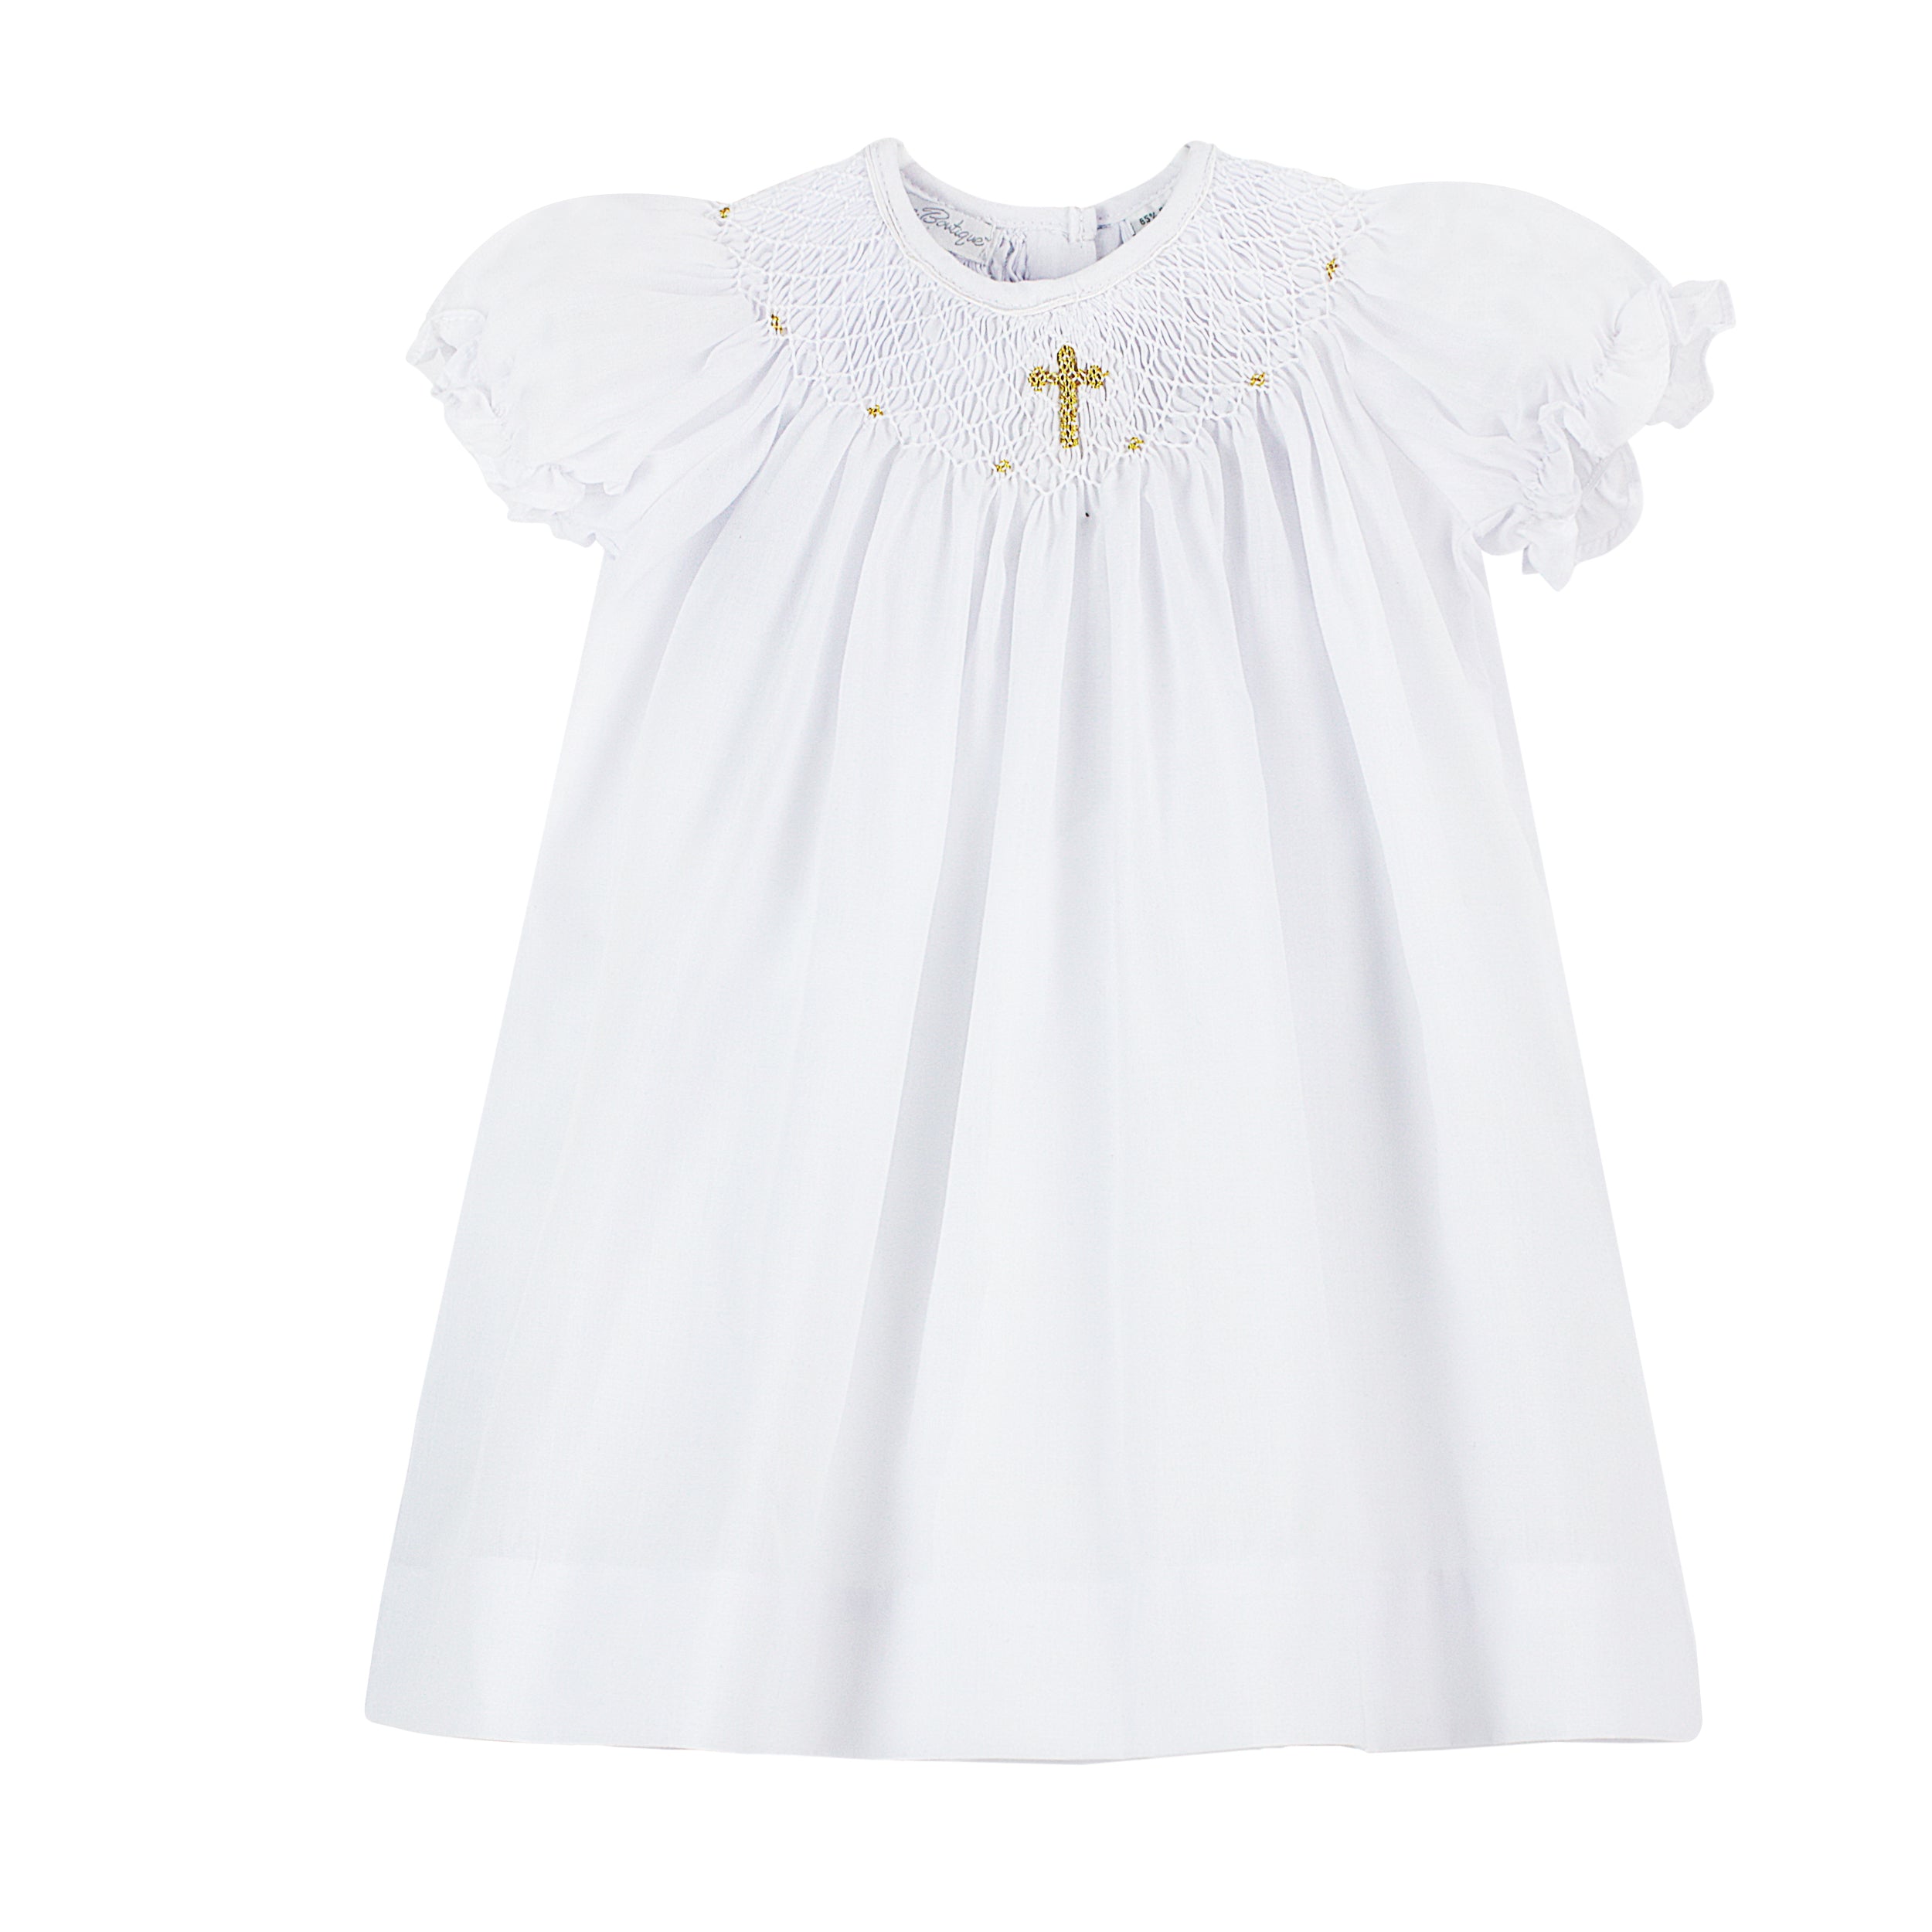  Baby Girls Hand Smocked Gold Cross Bishop Dress with Bonnet - White, , Carriage Boutique, Imagewear 